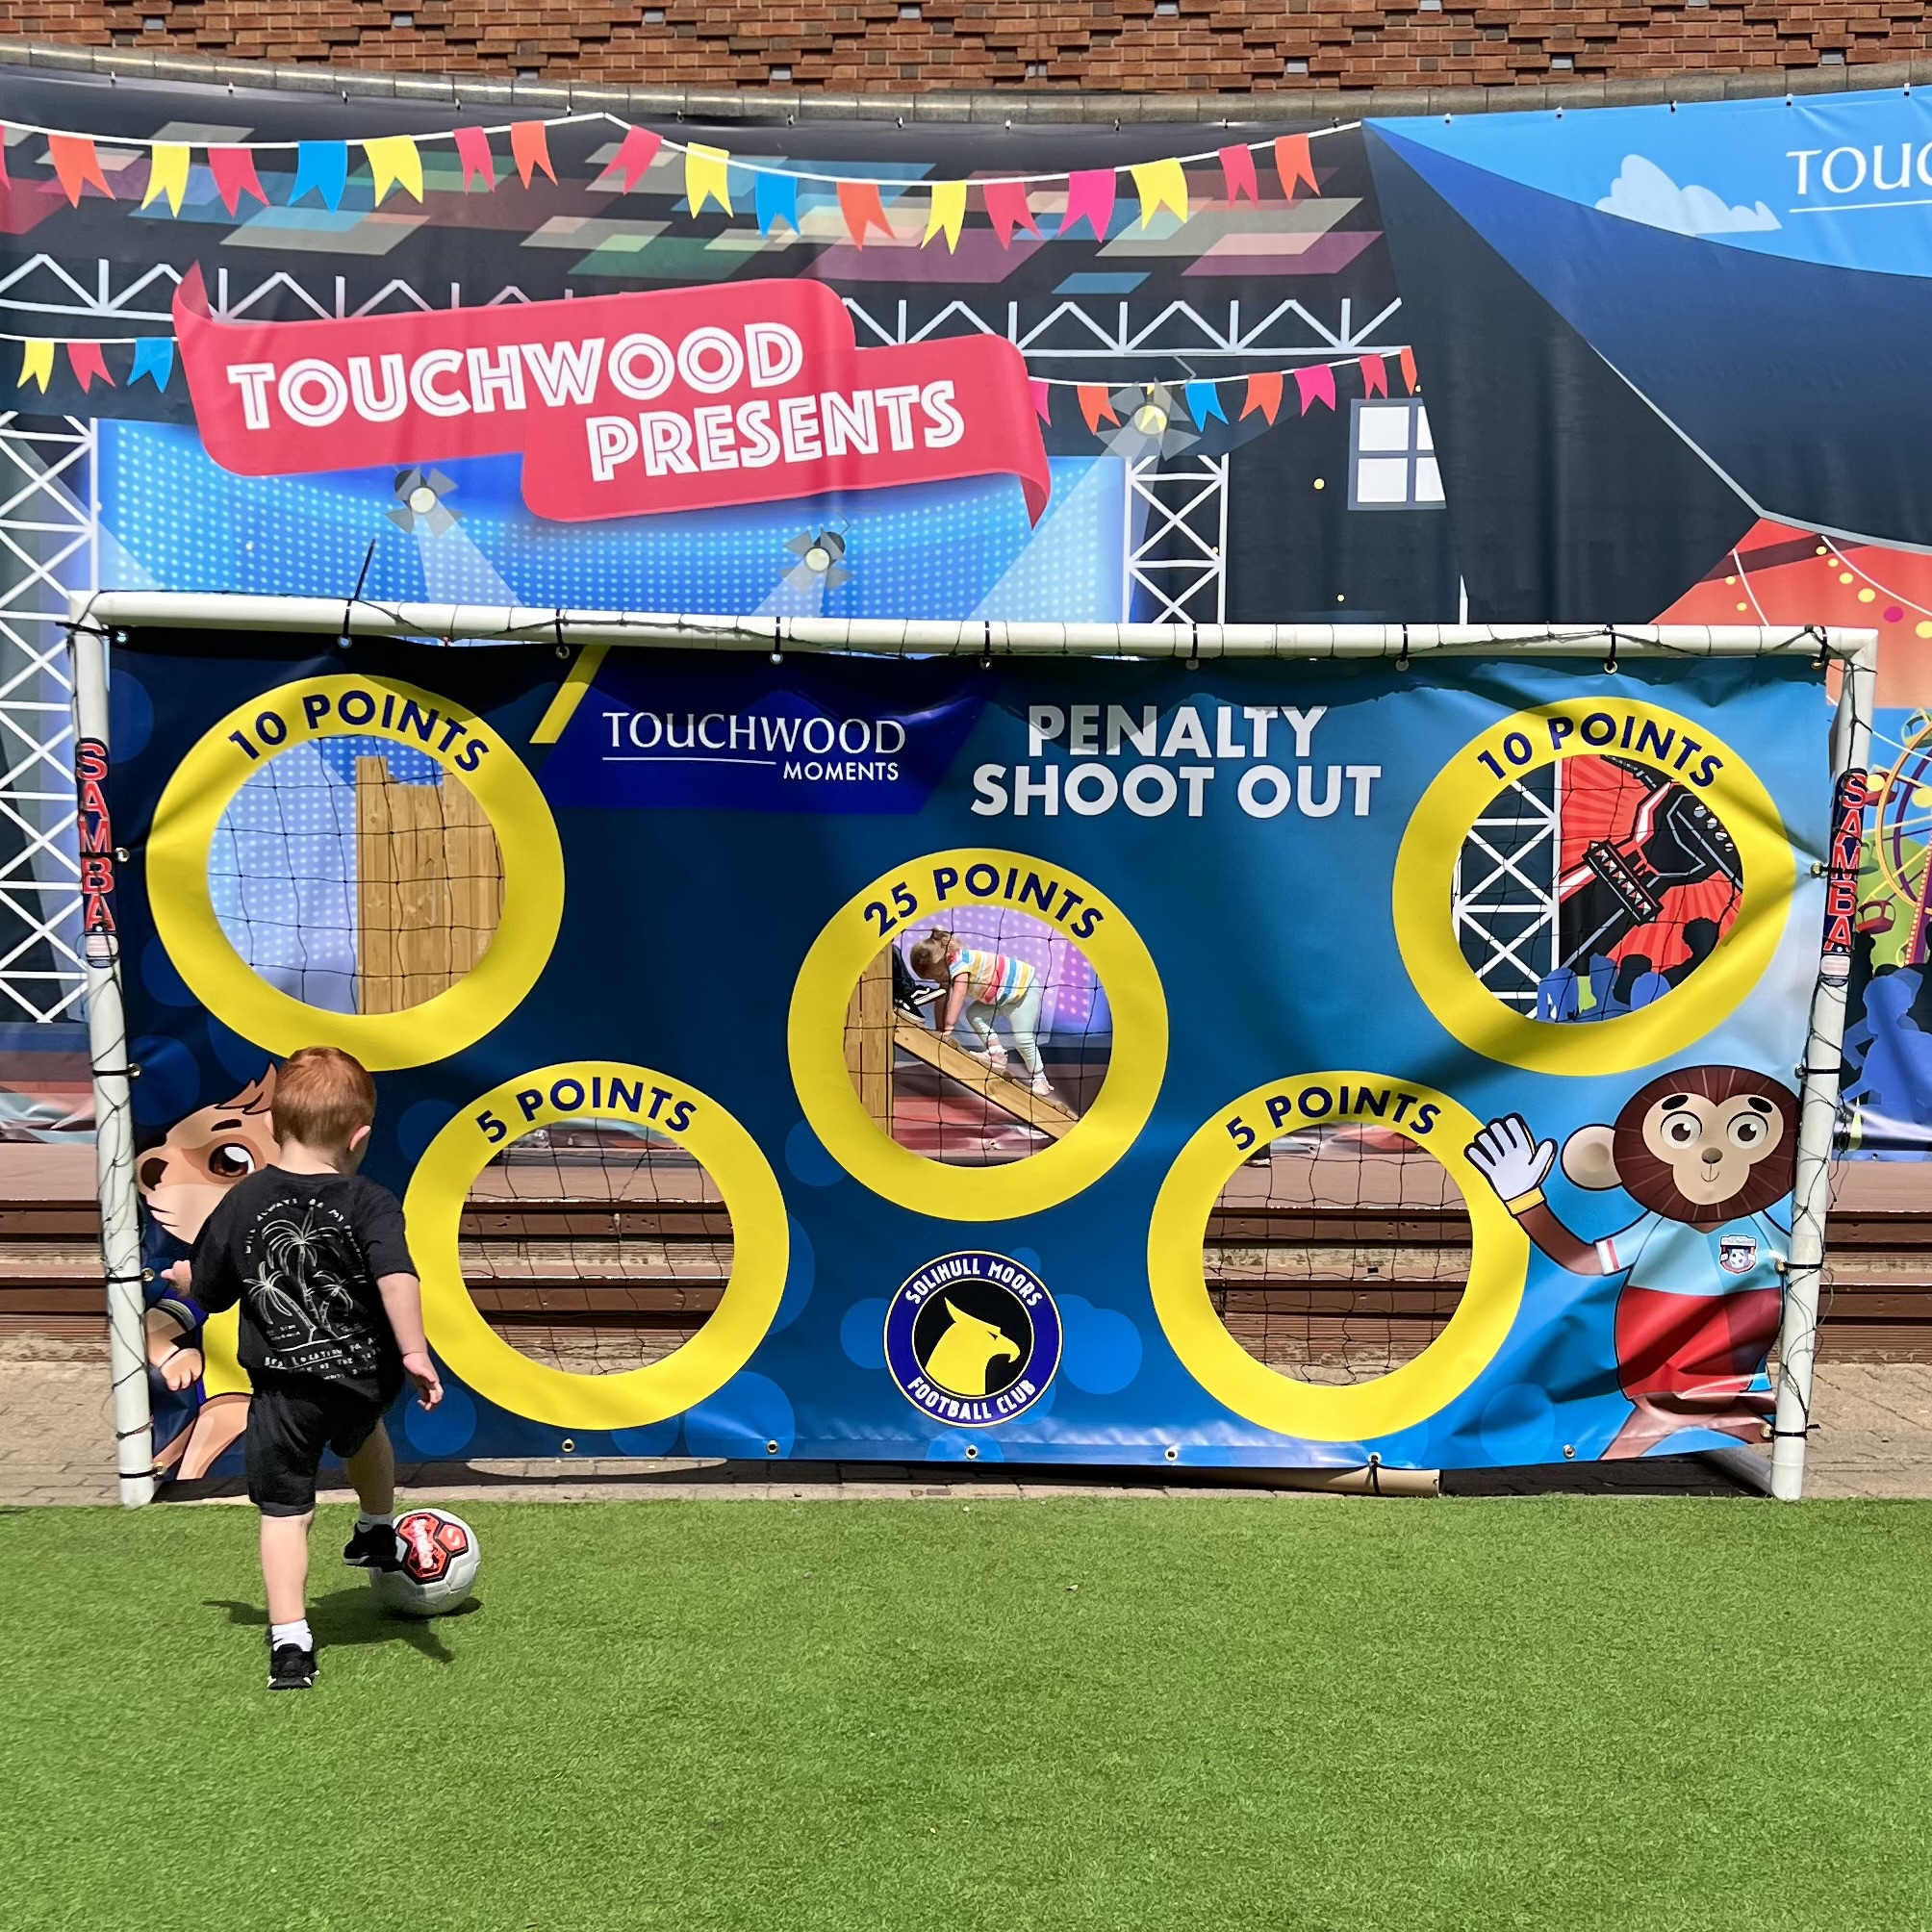 May’s mega line-up at Touchwood: Animal Show Live, Mental Health Awareness Week, Robocode and Footie Fest